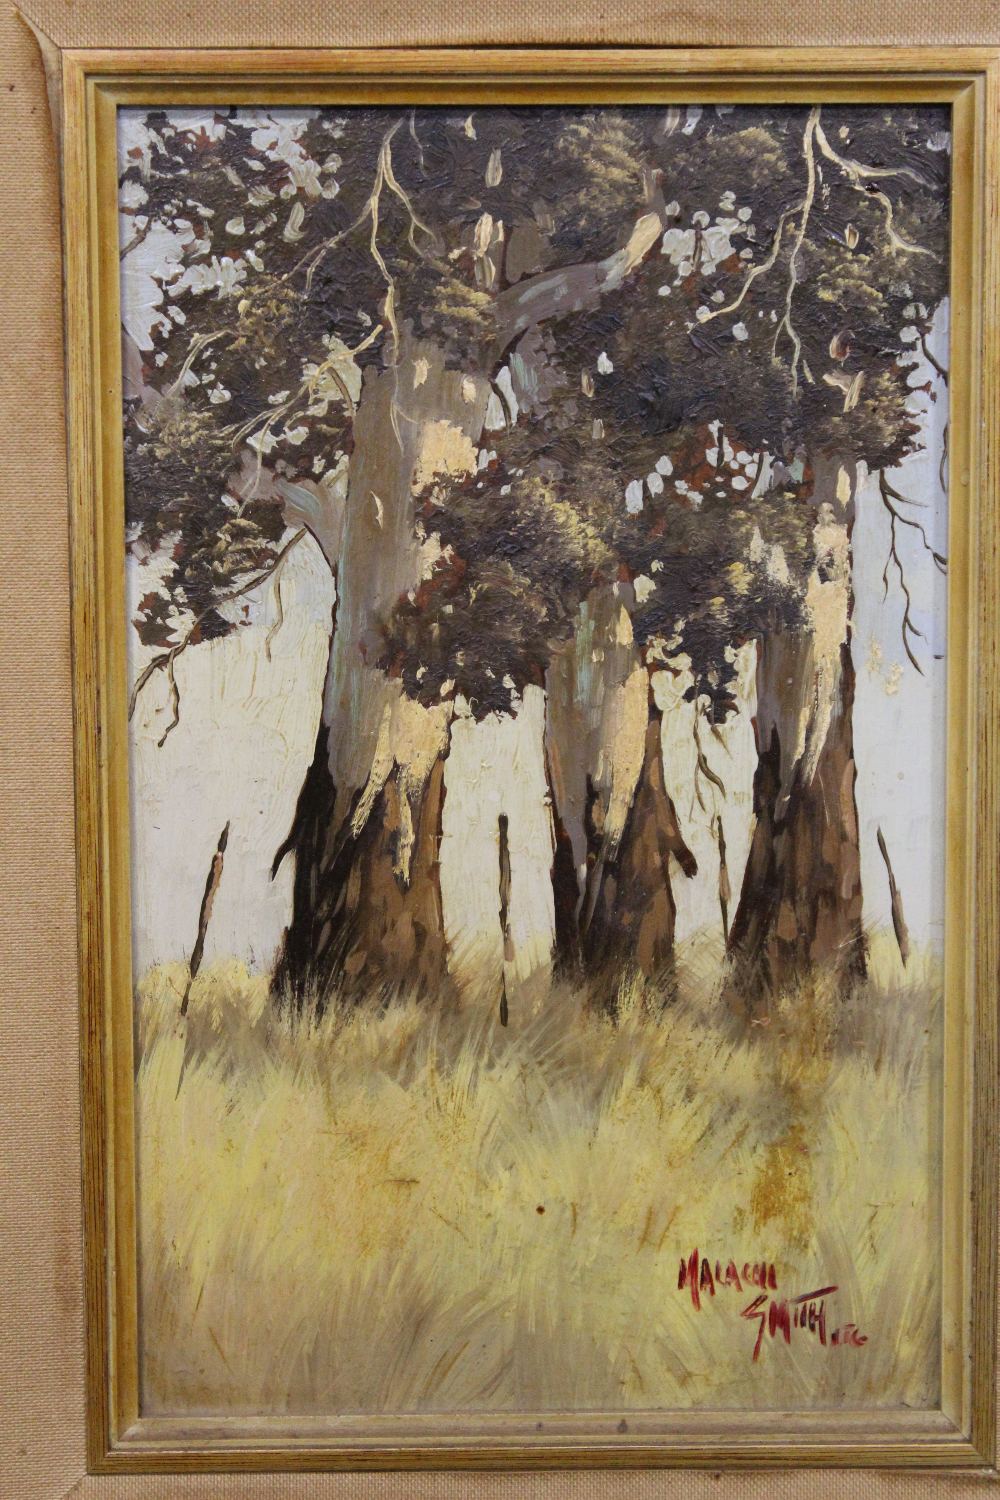 A FRAMED OIL ON BOARD STUDY OF TREE TRUNKS, SIGNED MALACHI SMITH LOWER RIGHT, OVERALL HEIGHT 48 CM